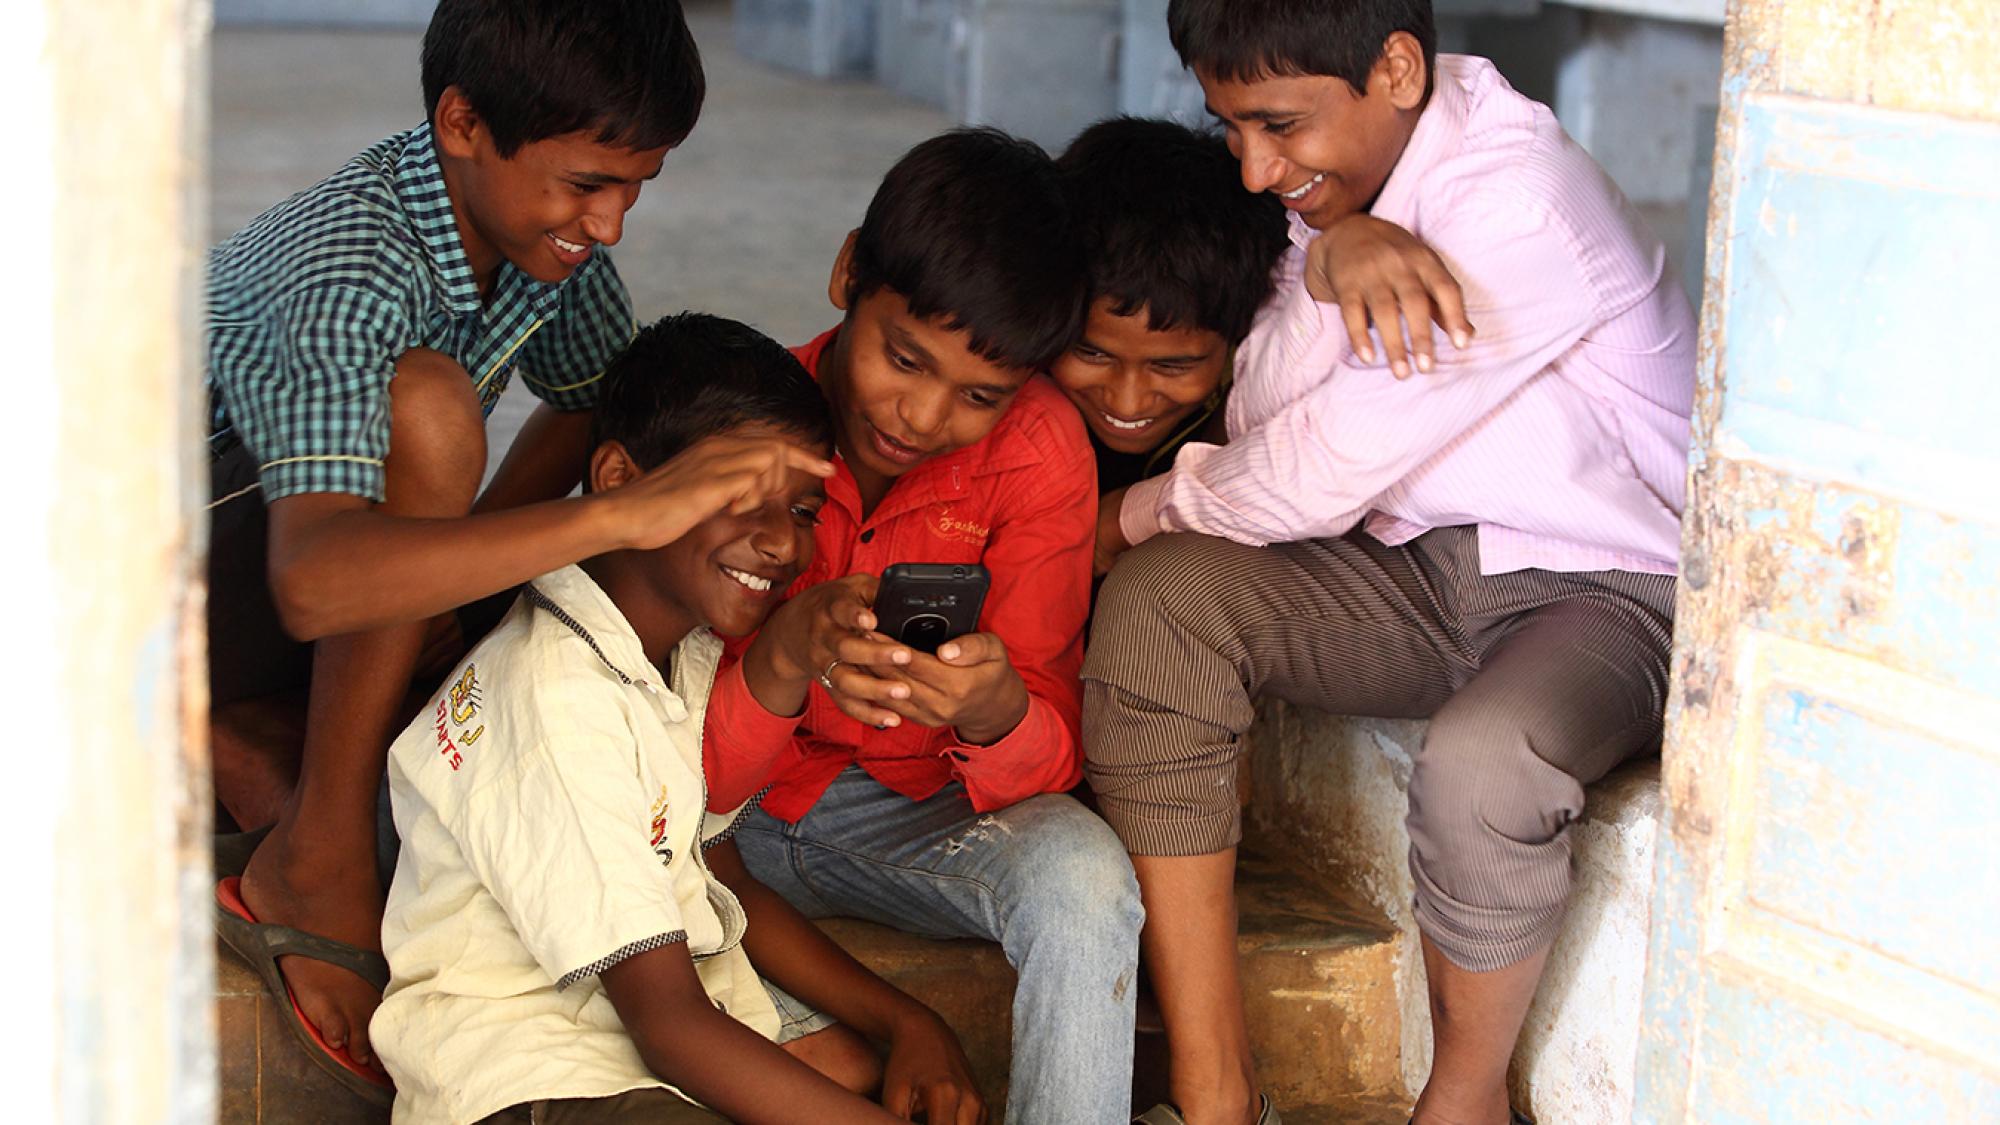 Boys watching a phone in India